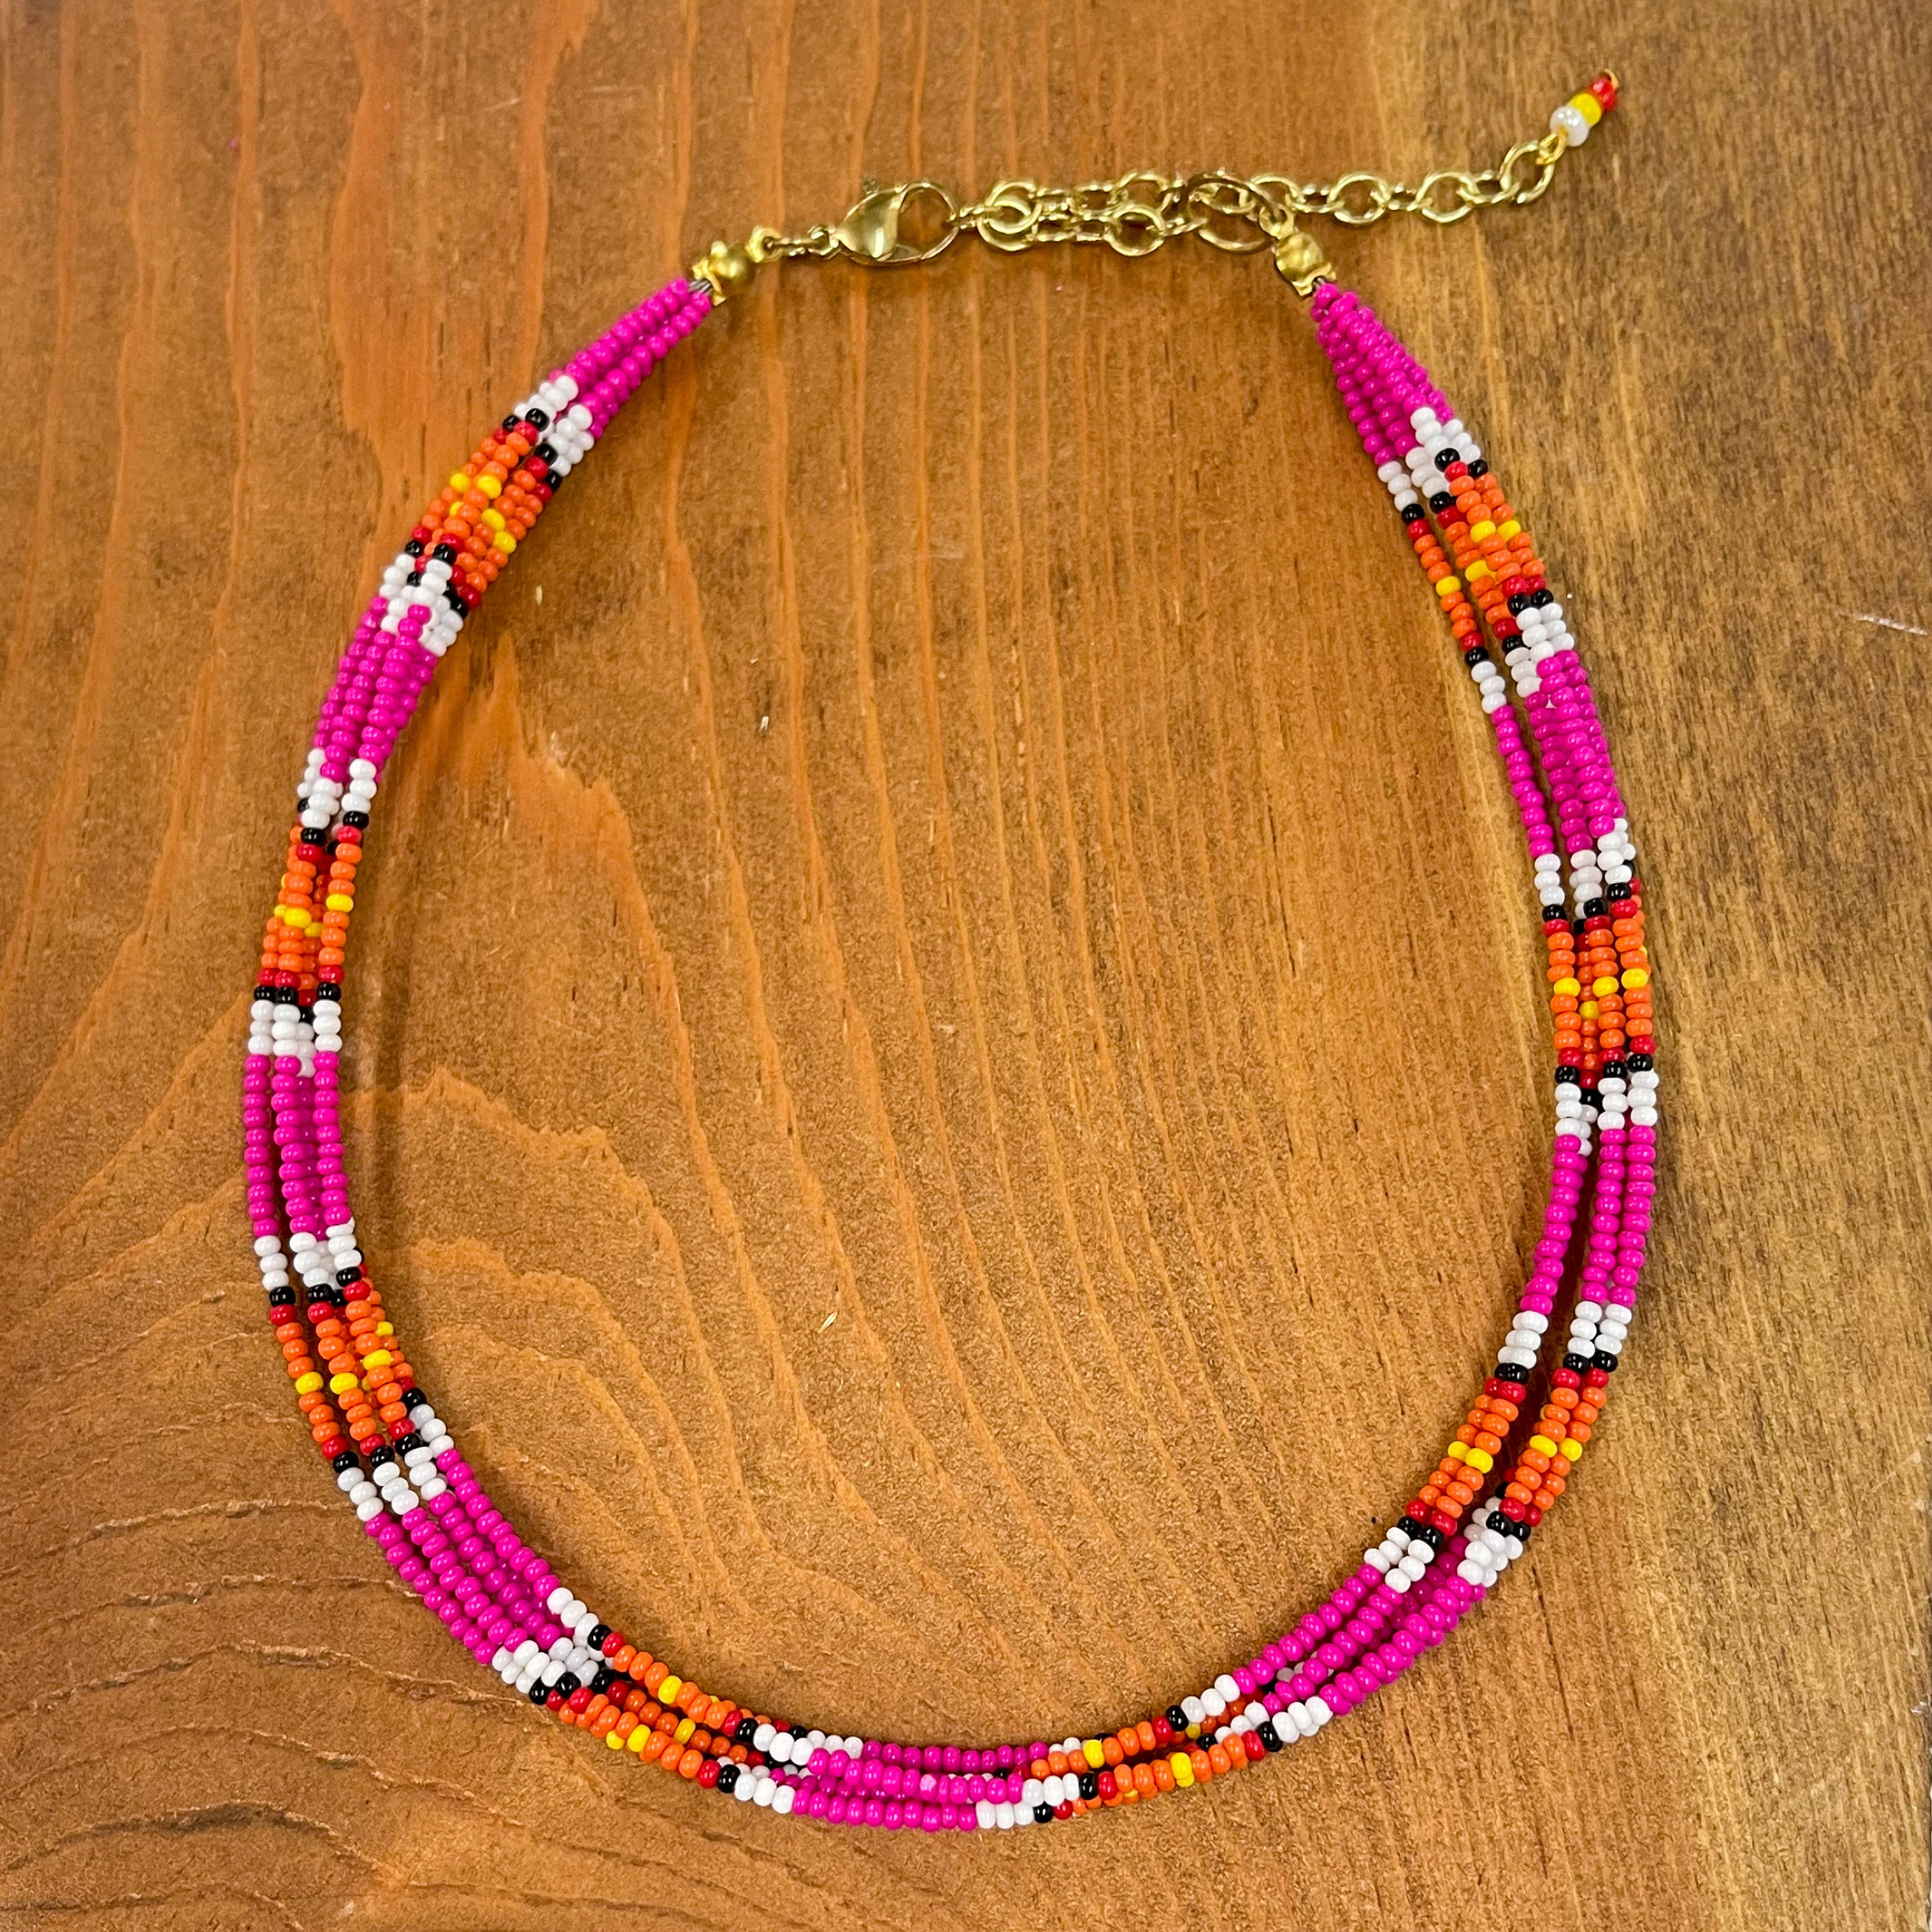 Multilayered seedbeaded choker in pink multicolor.  Majority of the beads are pink, other colors include; white, black, orange, red, and yellow. The adjustable  chain has three beads in colors, white, yellow, and  red. These earrings are taken on a brown block.